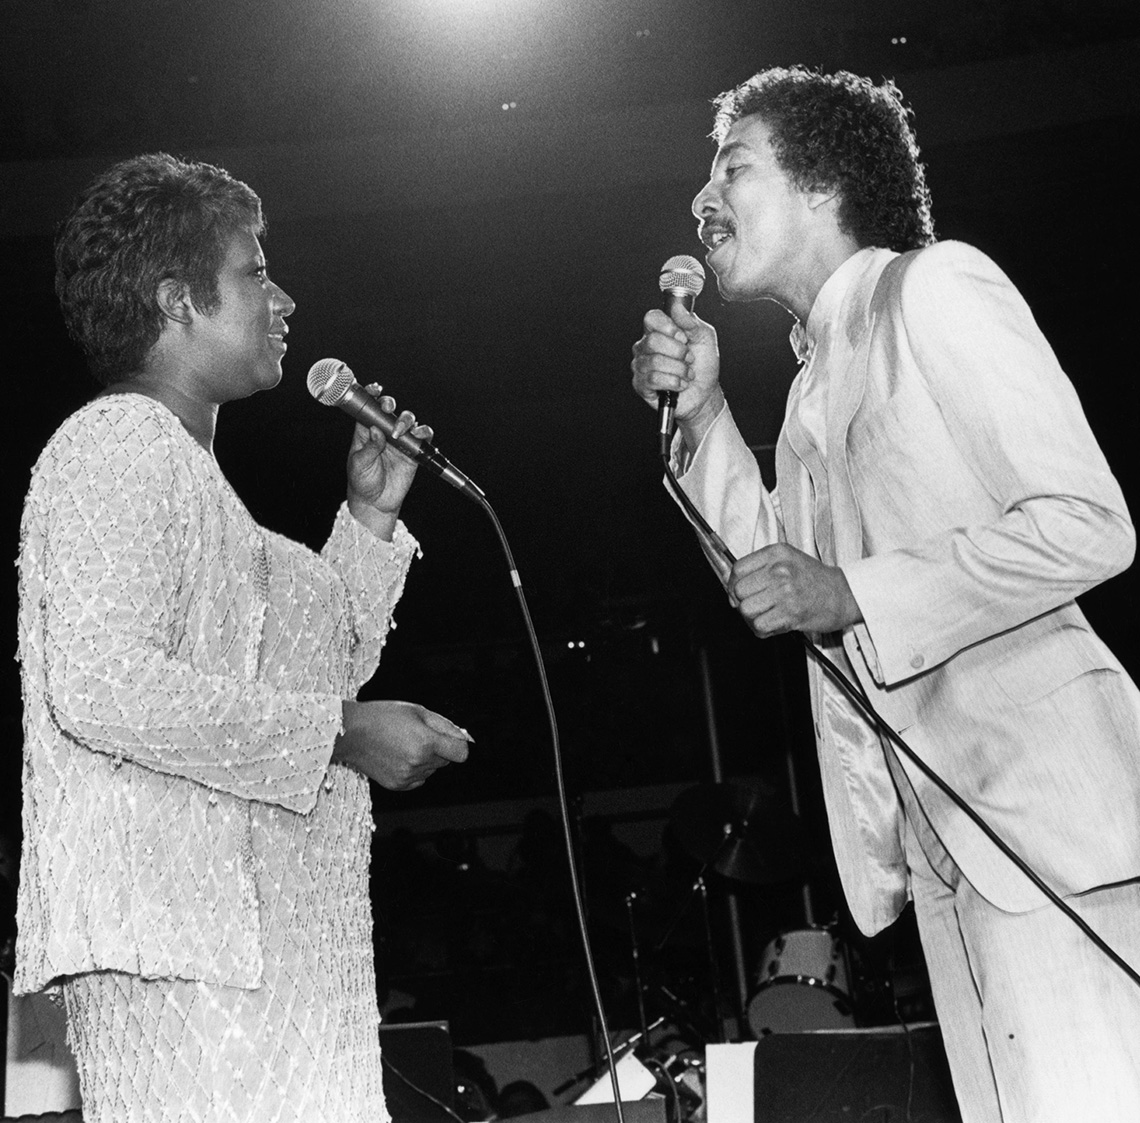 Aretha Franklin signing on stage with Smokey Robinson